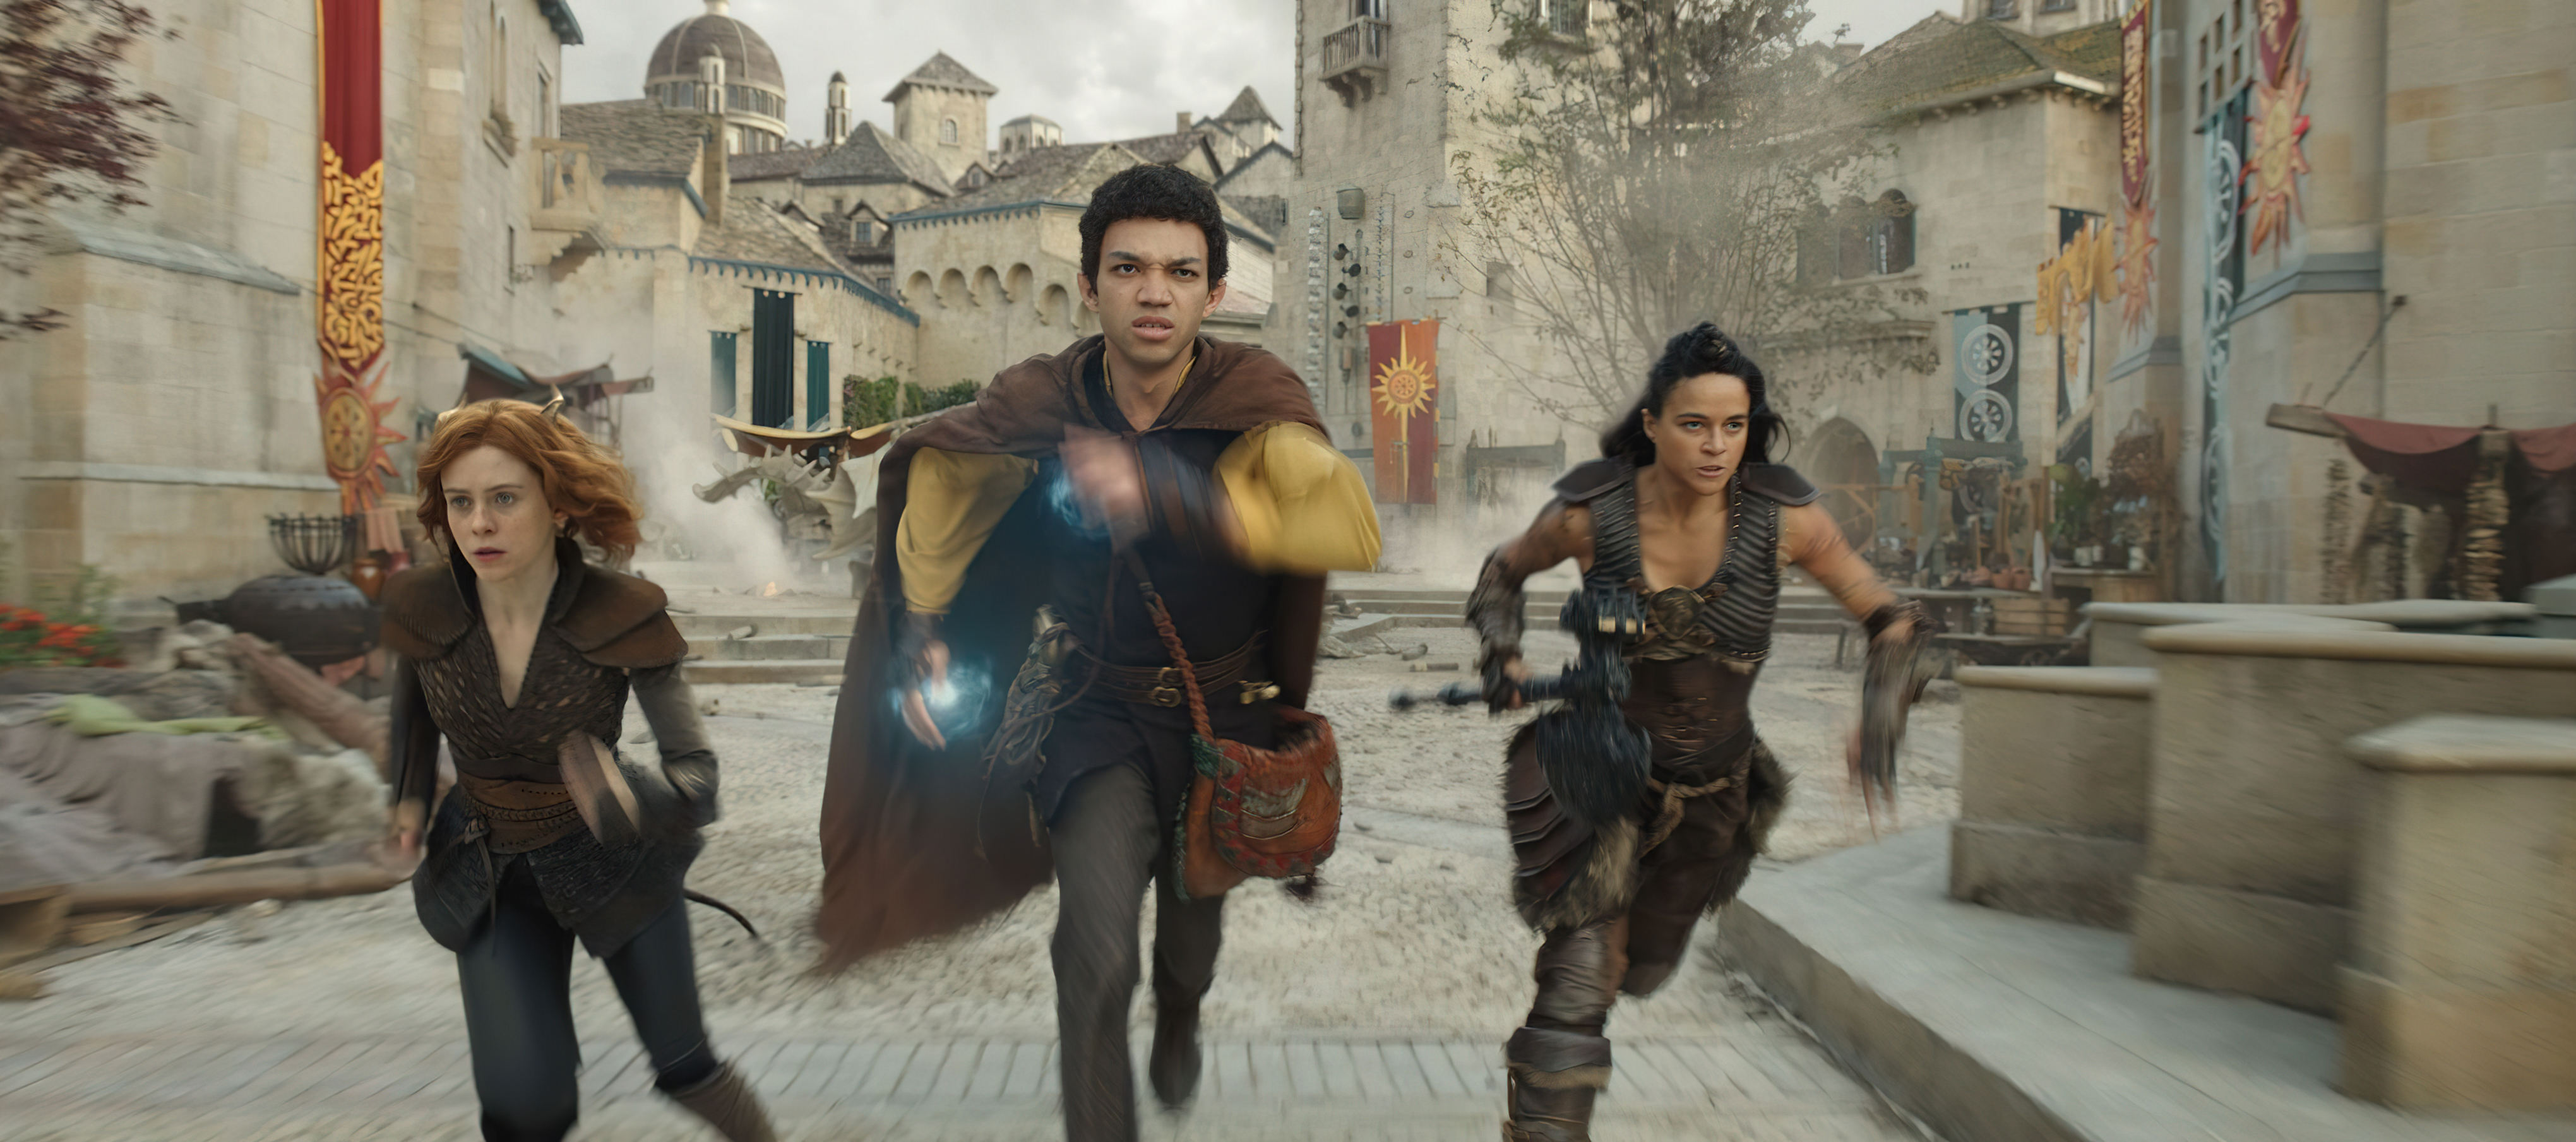 Sophia Lillis plays Doric, Justice Smith plays Simon and Michelle Rodriguez plays Holga in 'Dungeons & Dragons: Honor Among Thieves'. Image: Paramount Pictures / eOne / Supplied